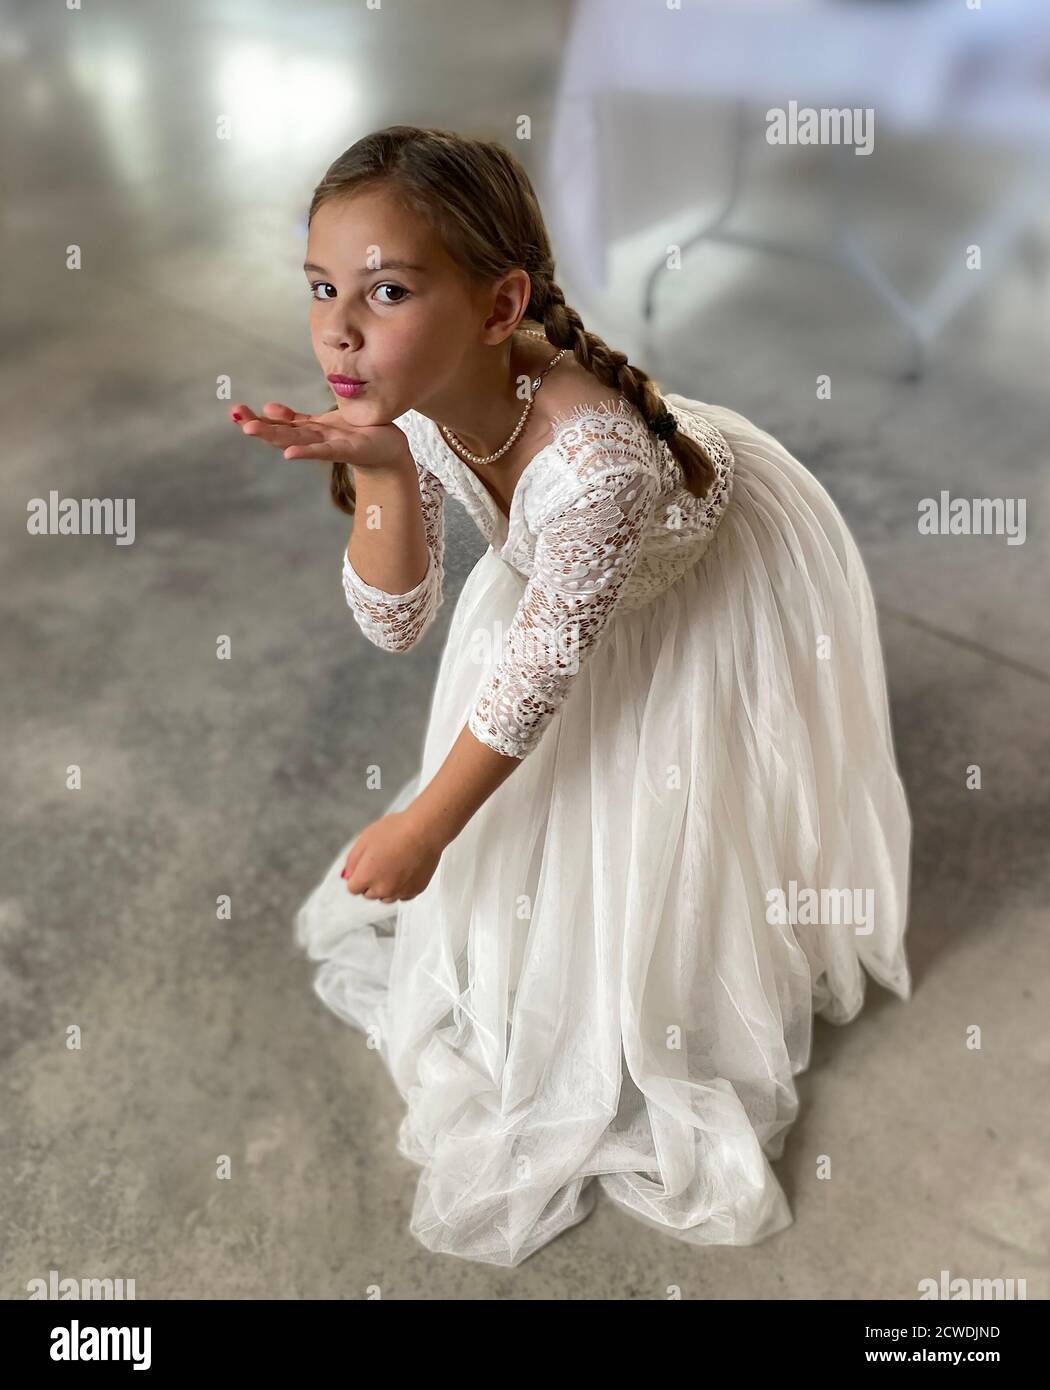 Portrait of a seven year old girl dressed up in a flower girl or communion dress Stock Photo